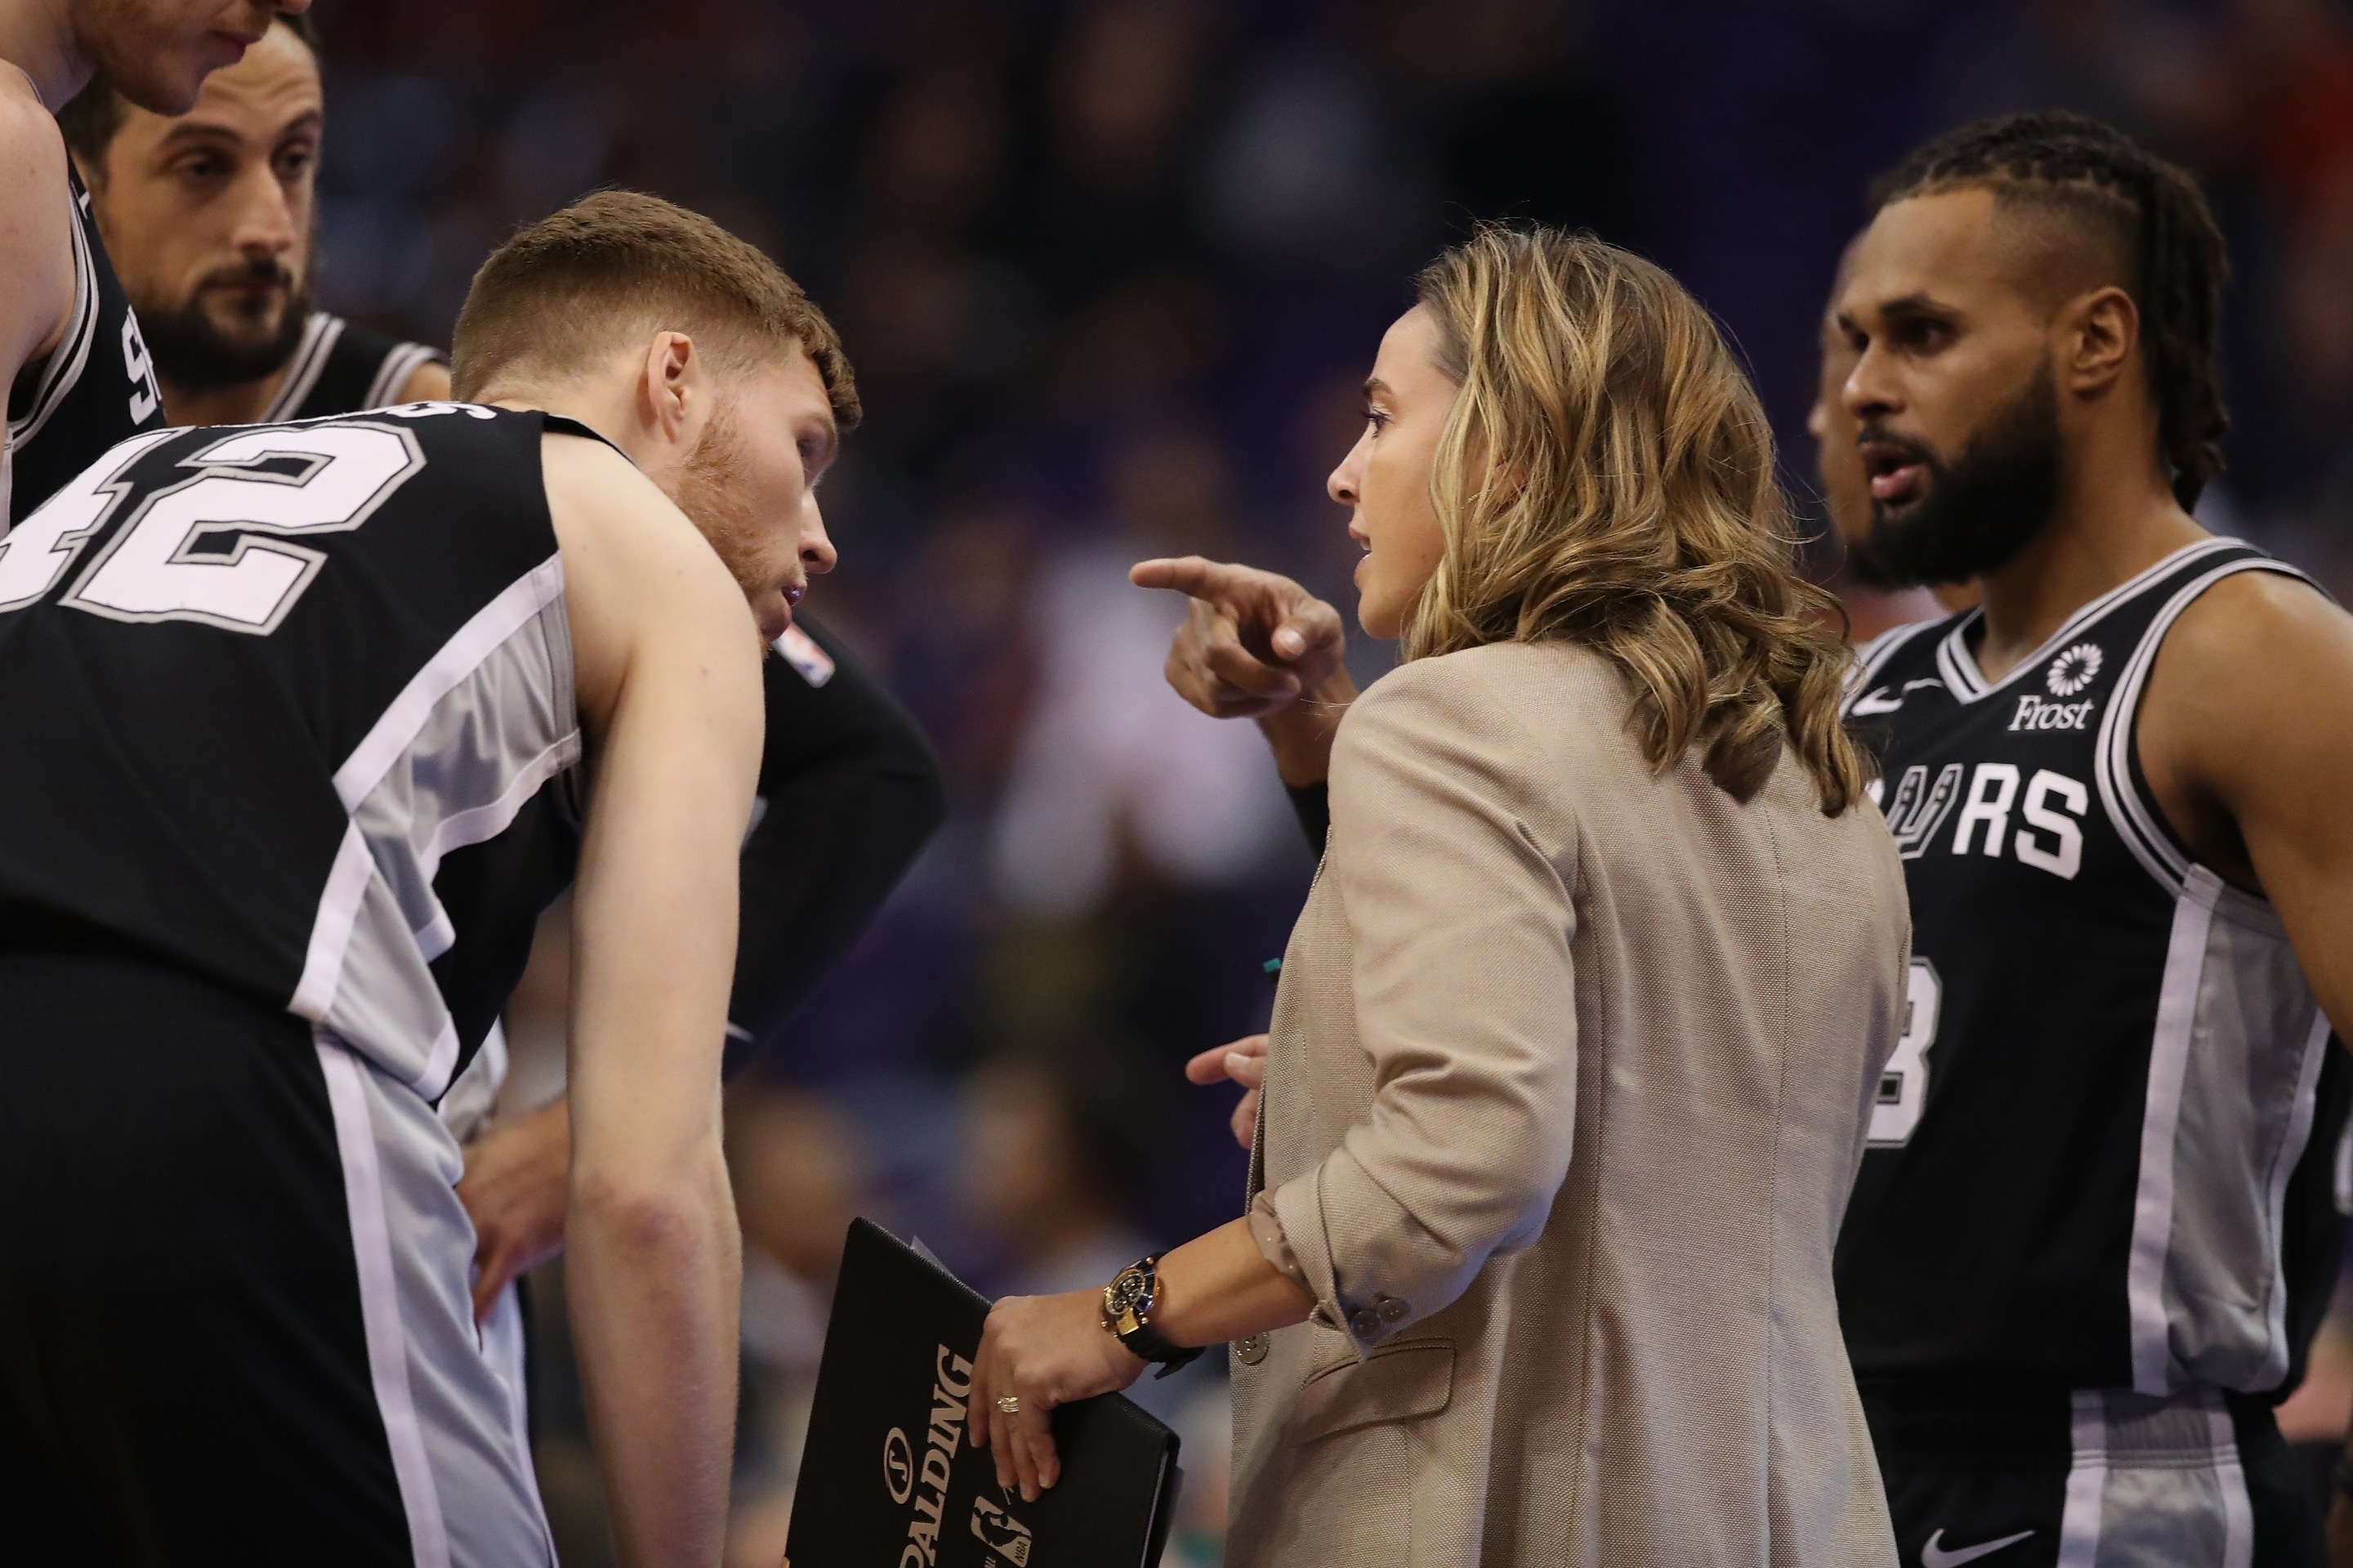 Assistant coach Becky Hammon of the San Antonio Spurs during the NBA game against the Phoenix Suns at Talking Stick Resort Arena on November 14, 2018 in Phoenix, Arizona.